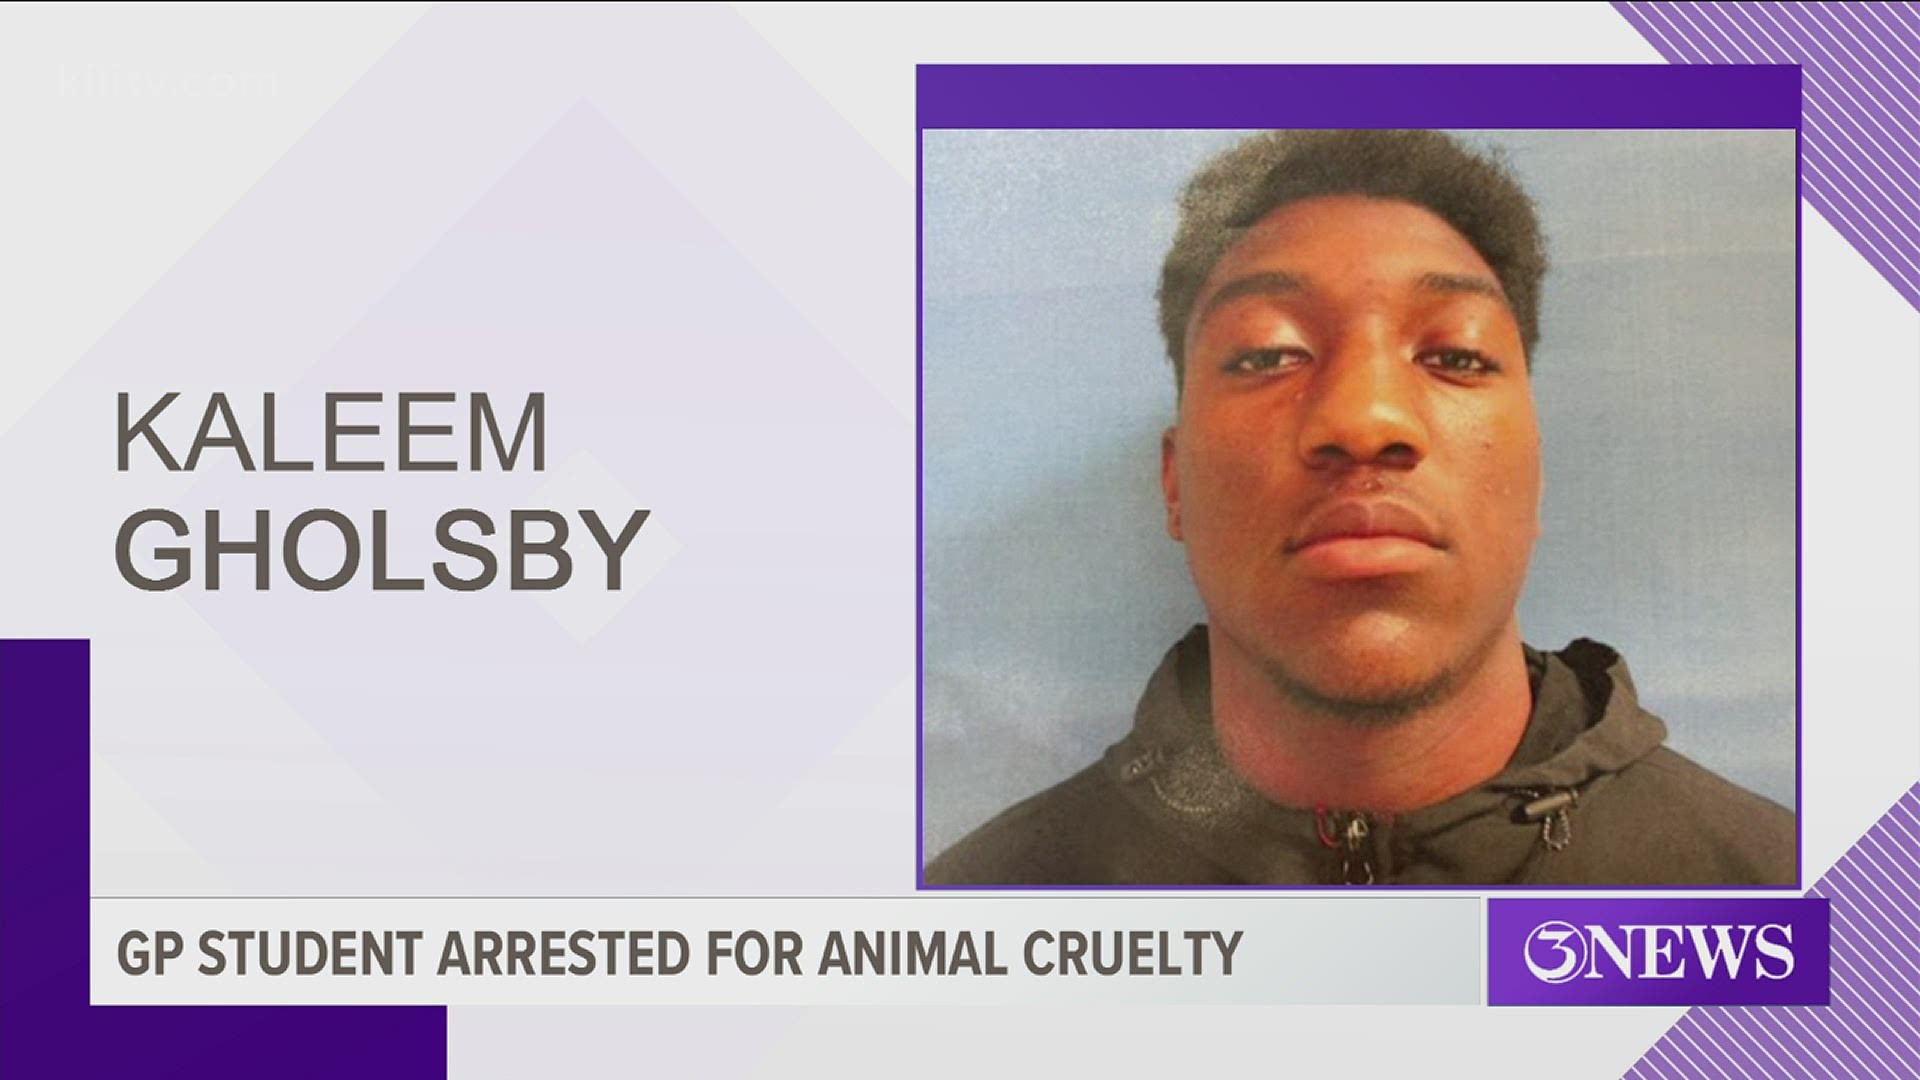 A disturbing video circling social media showed 17-year-old Kaleem Gholsby slamming a cat on the ground.